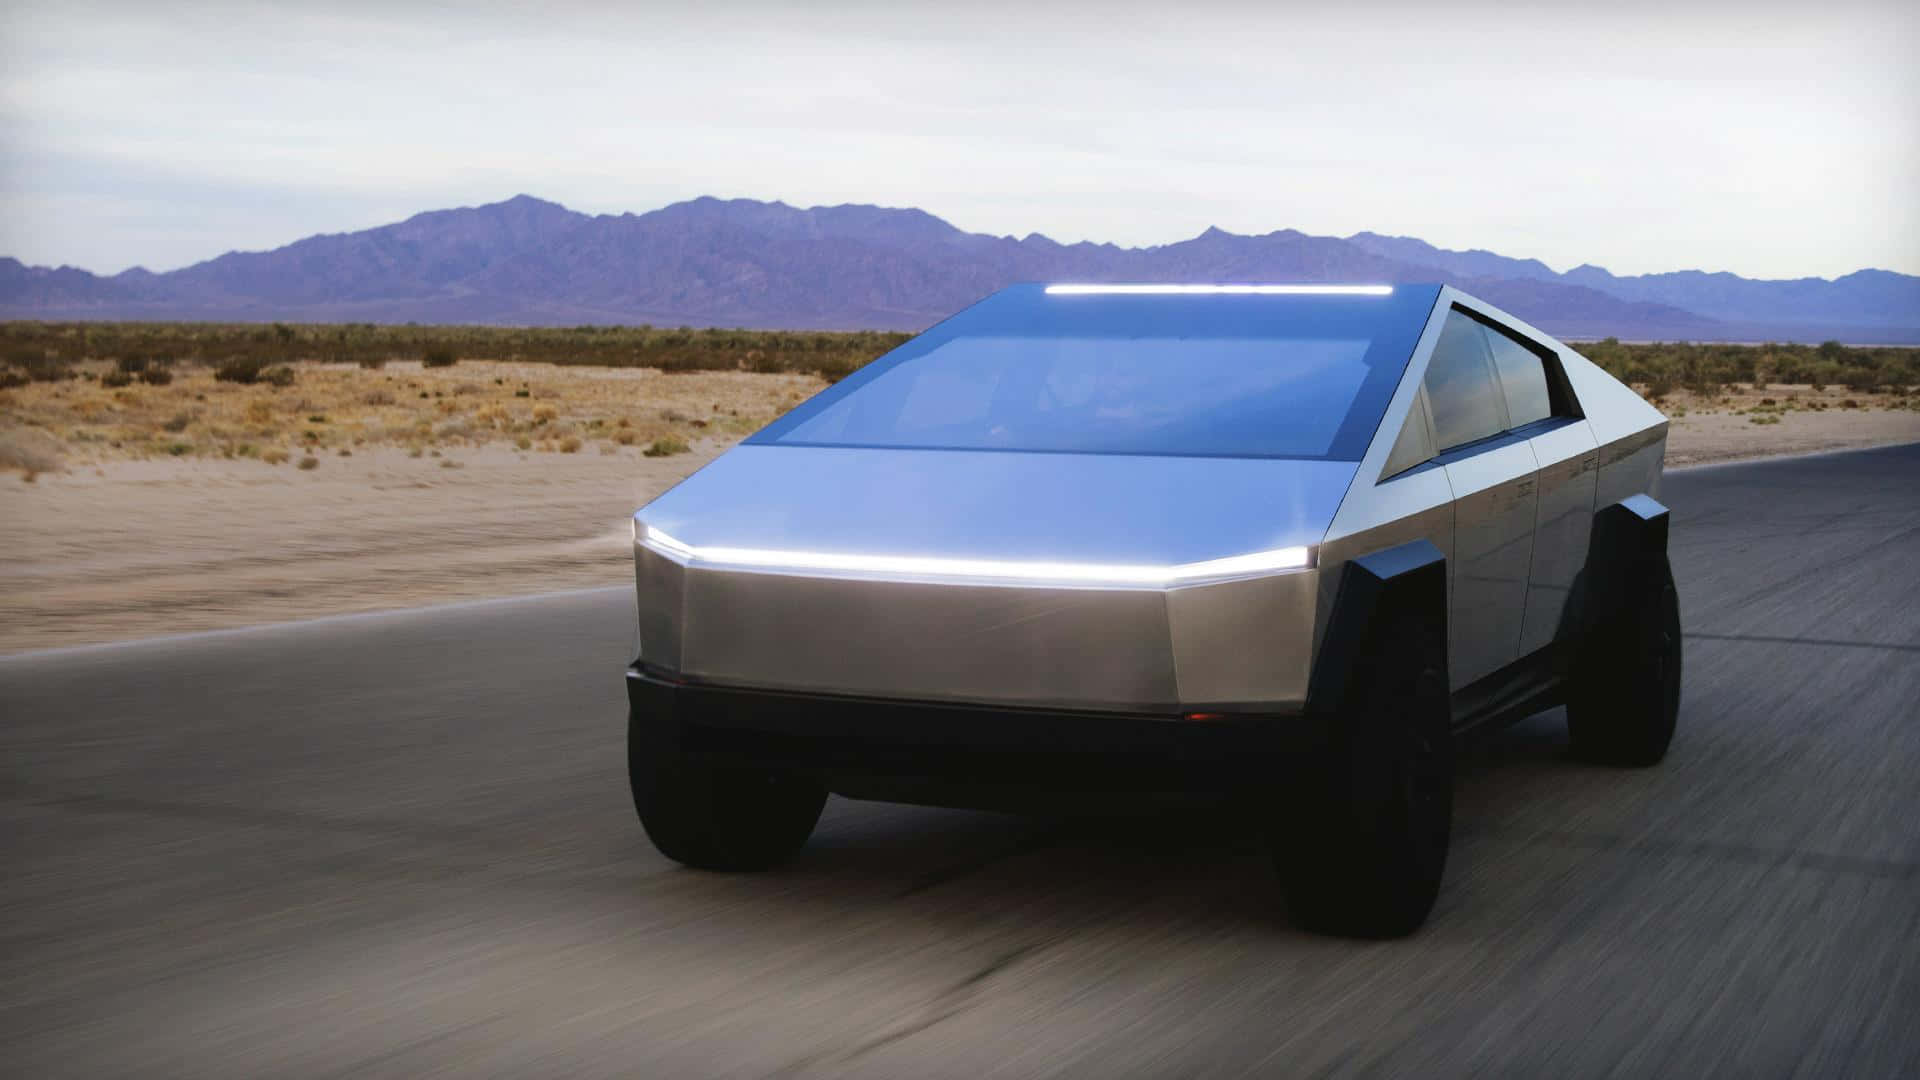 The future of transport is here with Tesla's revolutionary Cybertruck.